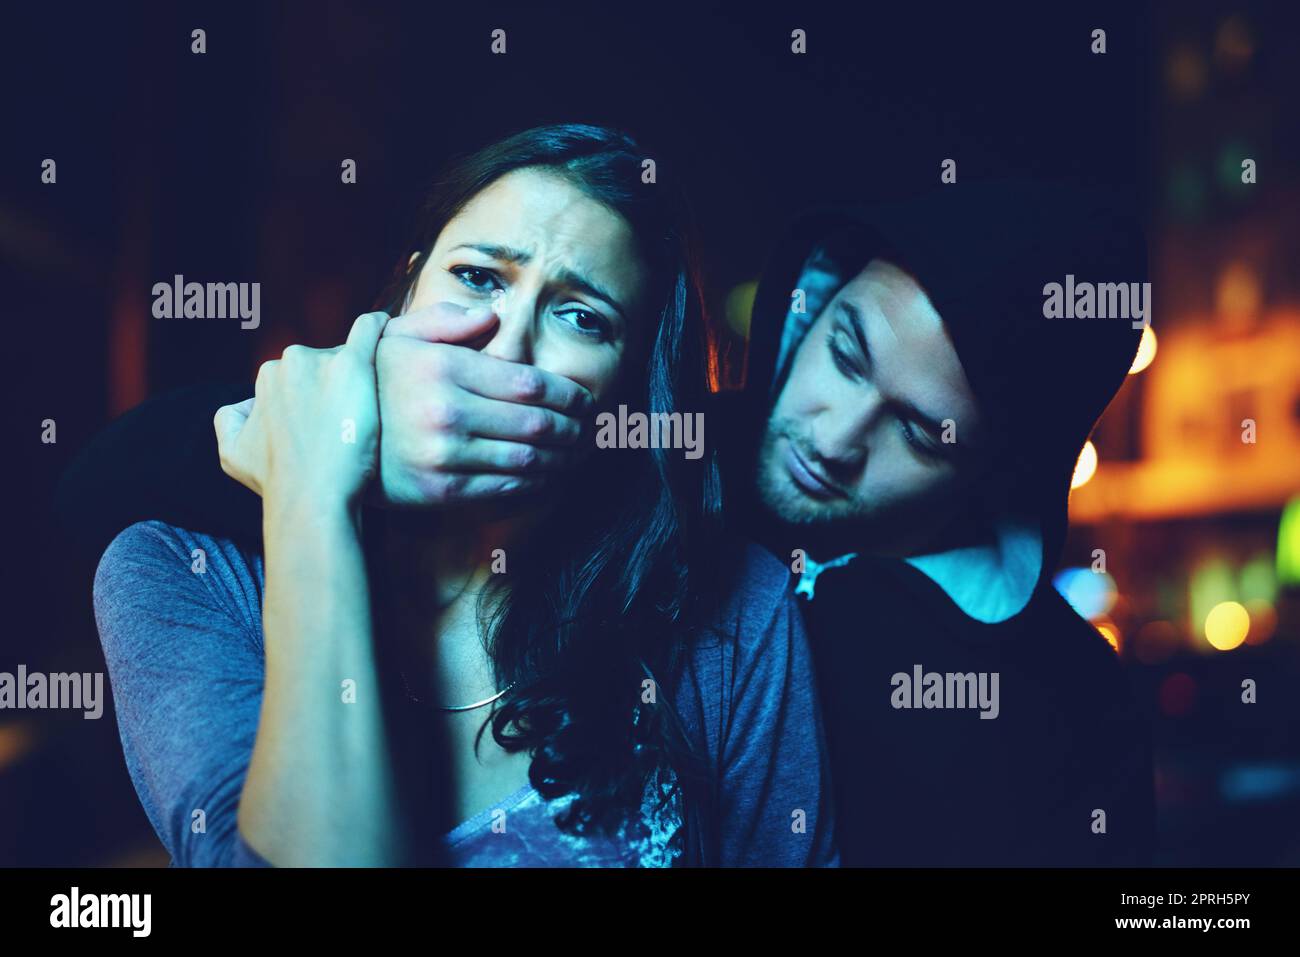 Now she truly knows crime. Portrait of a frightened young woman with her assailants hand over her mouth. Stock Photo